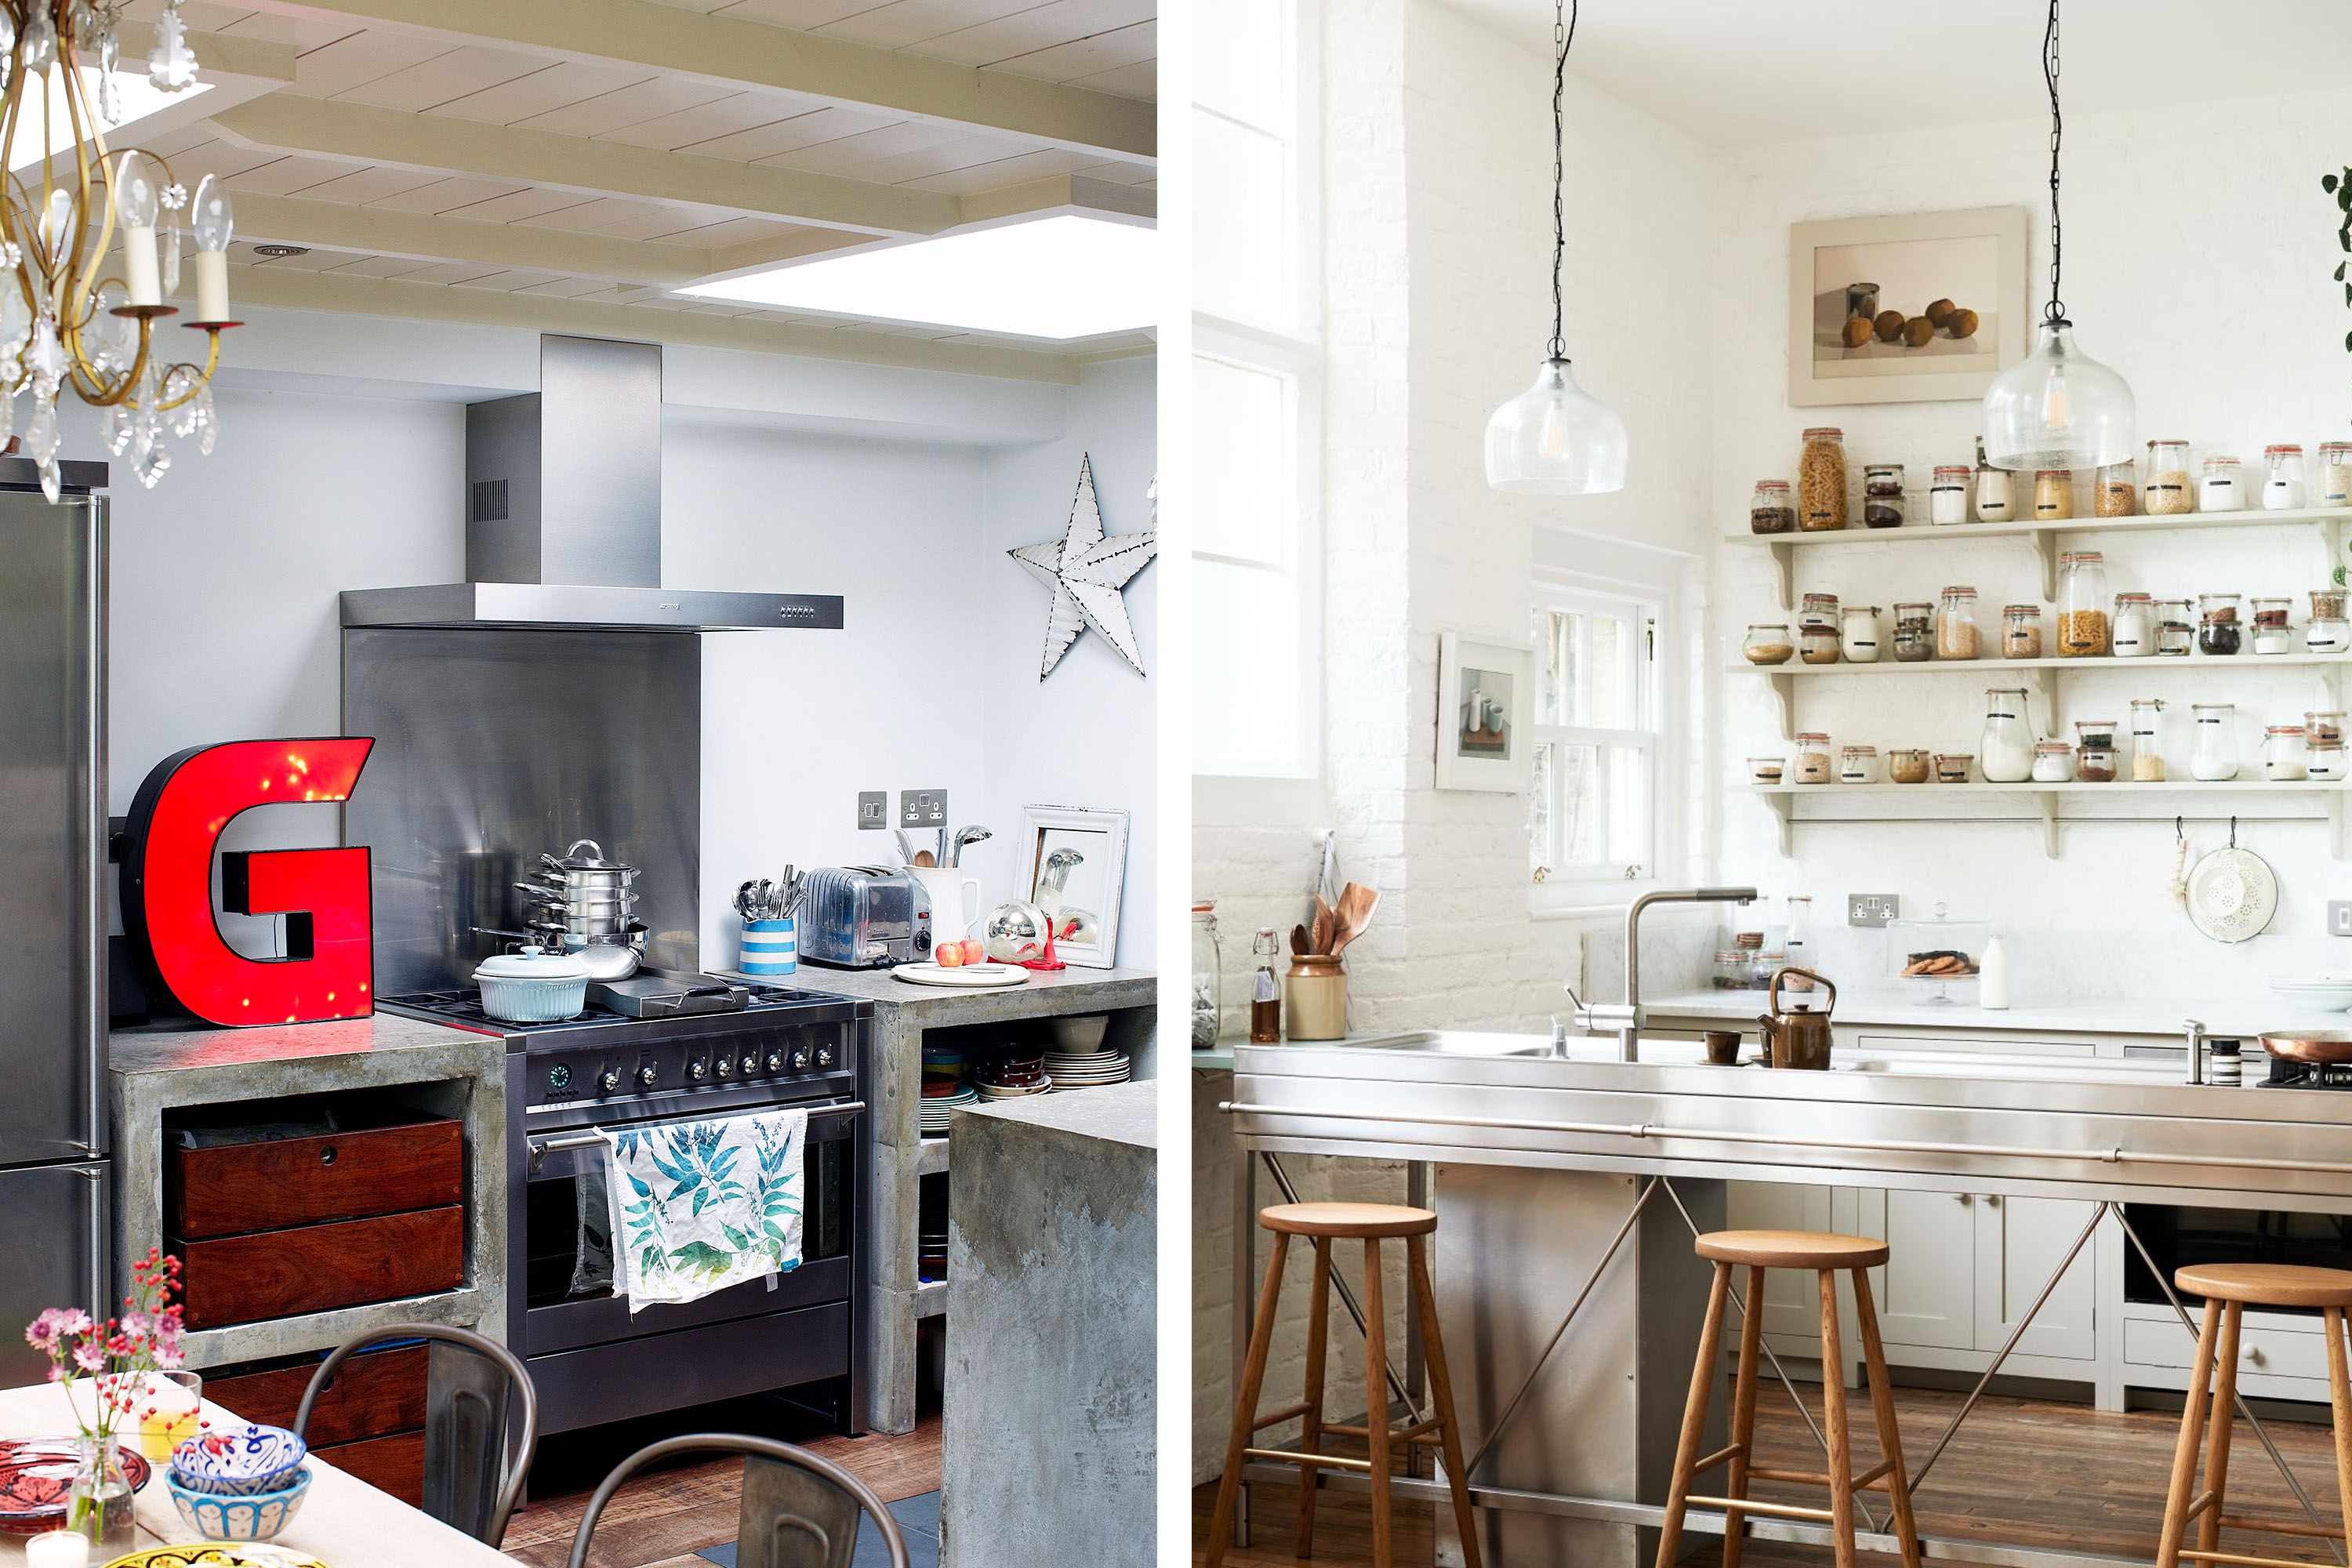 English Country Kitchens Are Trending—Here's How to Recreate the Look